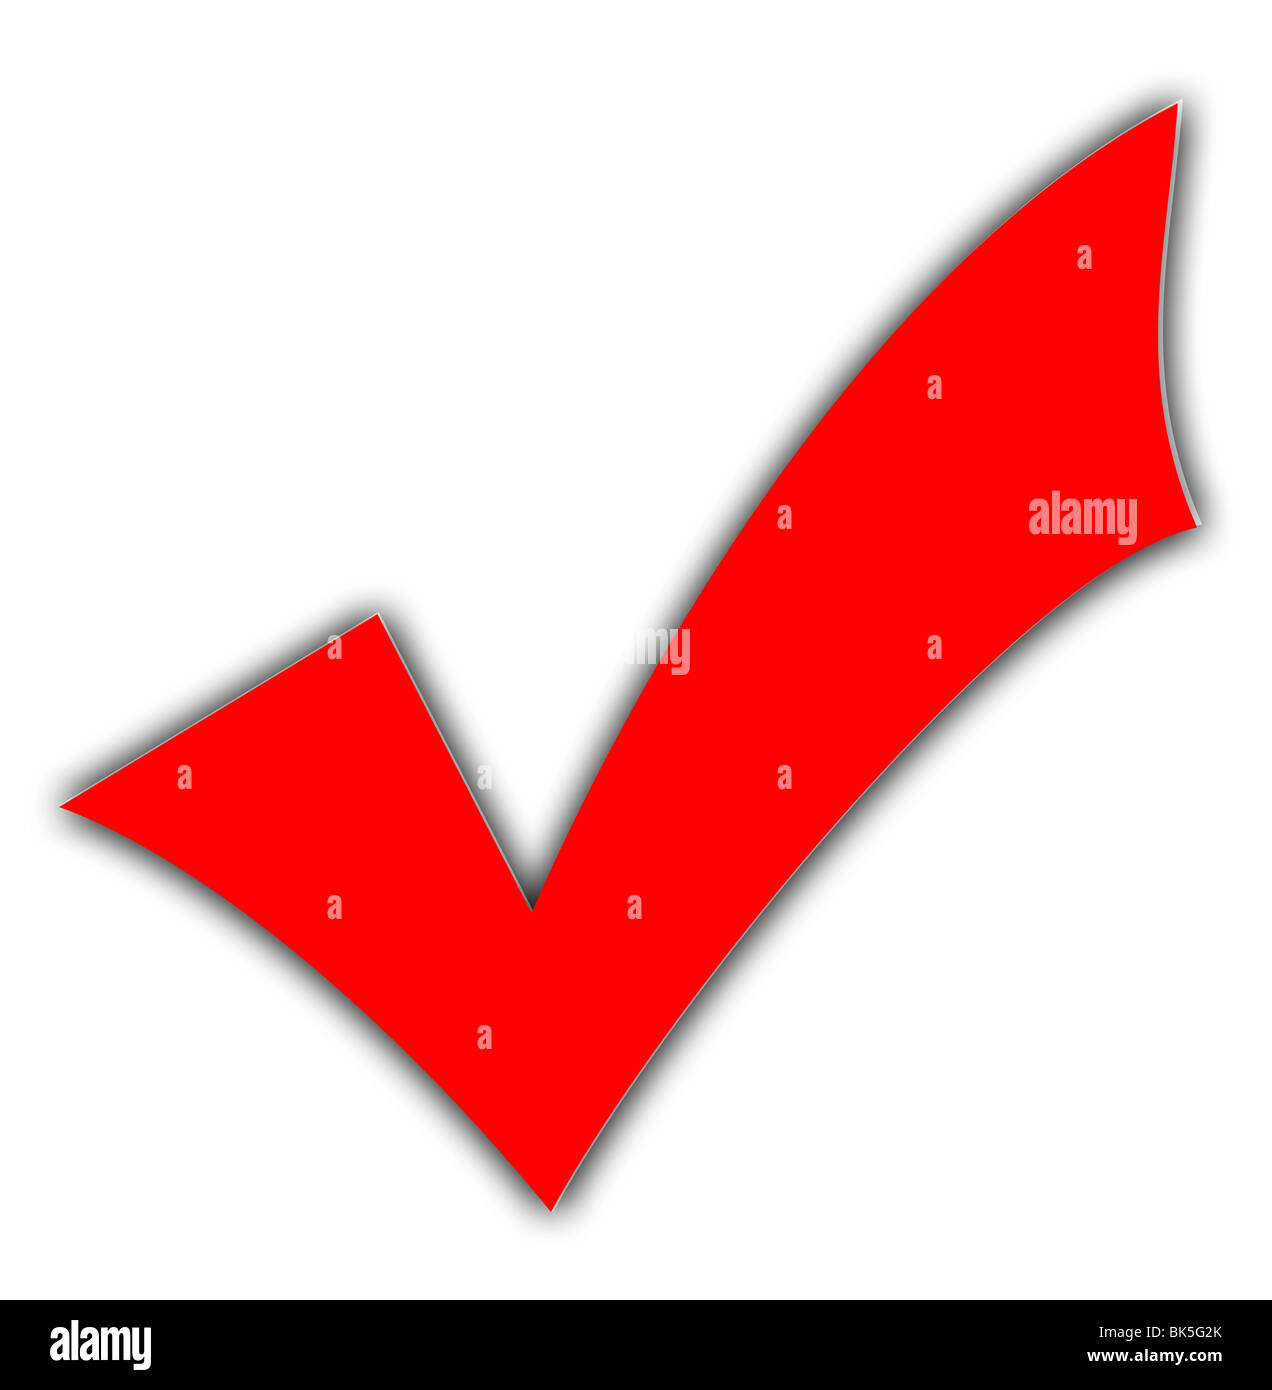 Red tick stock images - Alamy